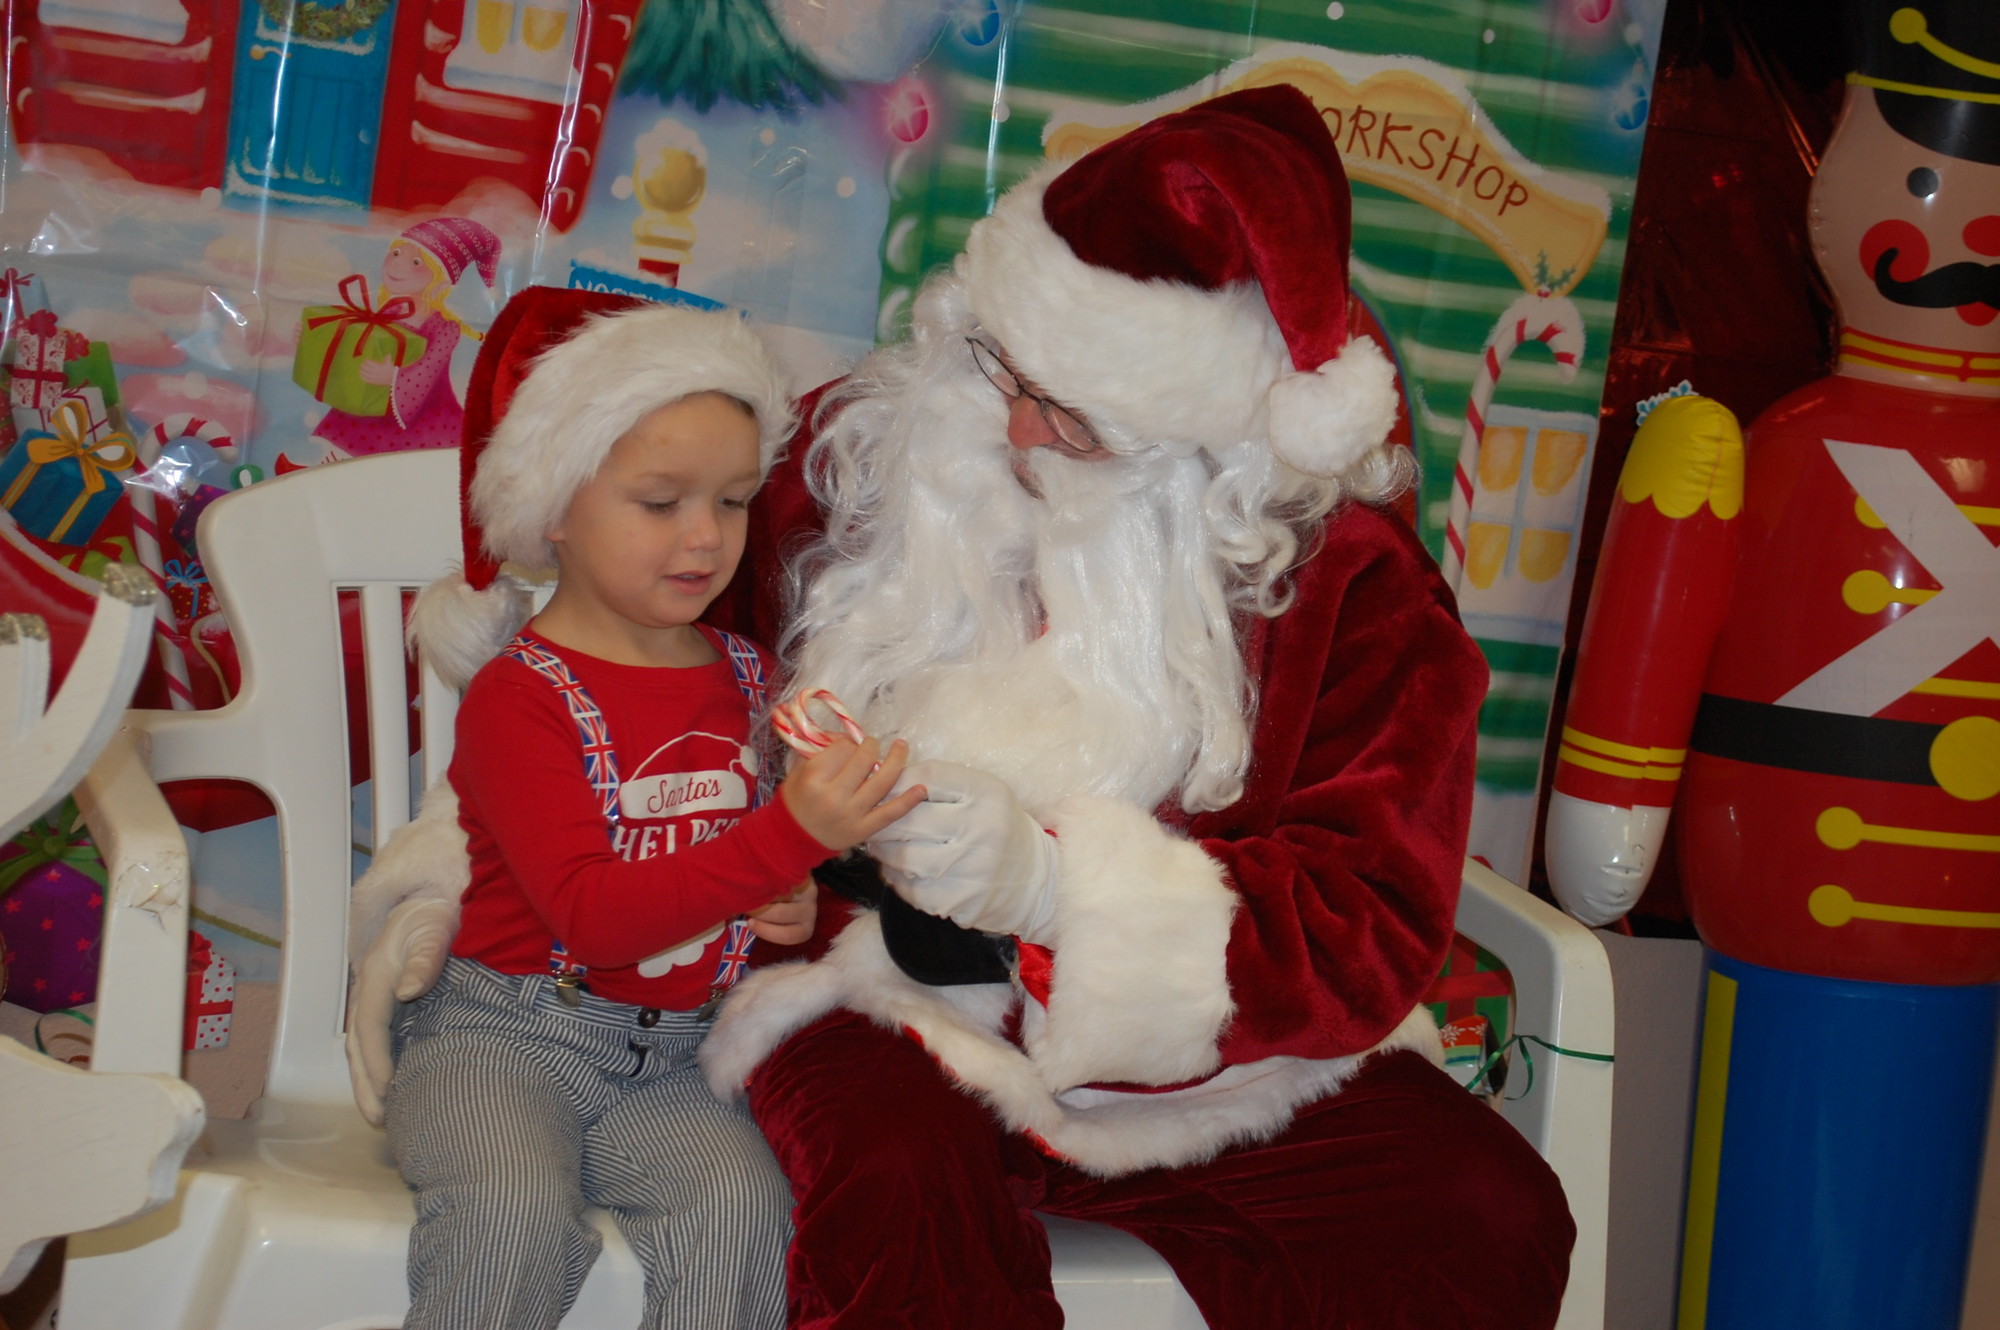 Cody Price, 4, of Seaford, got a treat from St. Nick at St. William the Abbot School’s annual Breakfast with Santa on Dec. 11. Cody is in pre-K.